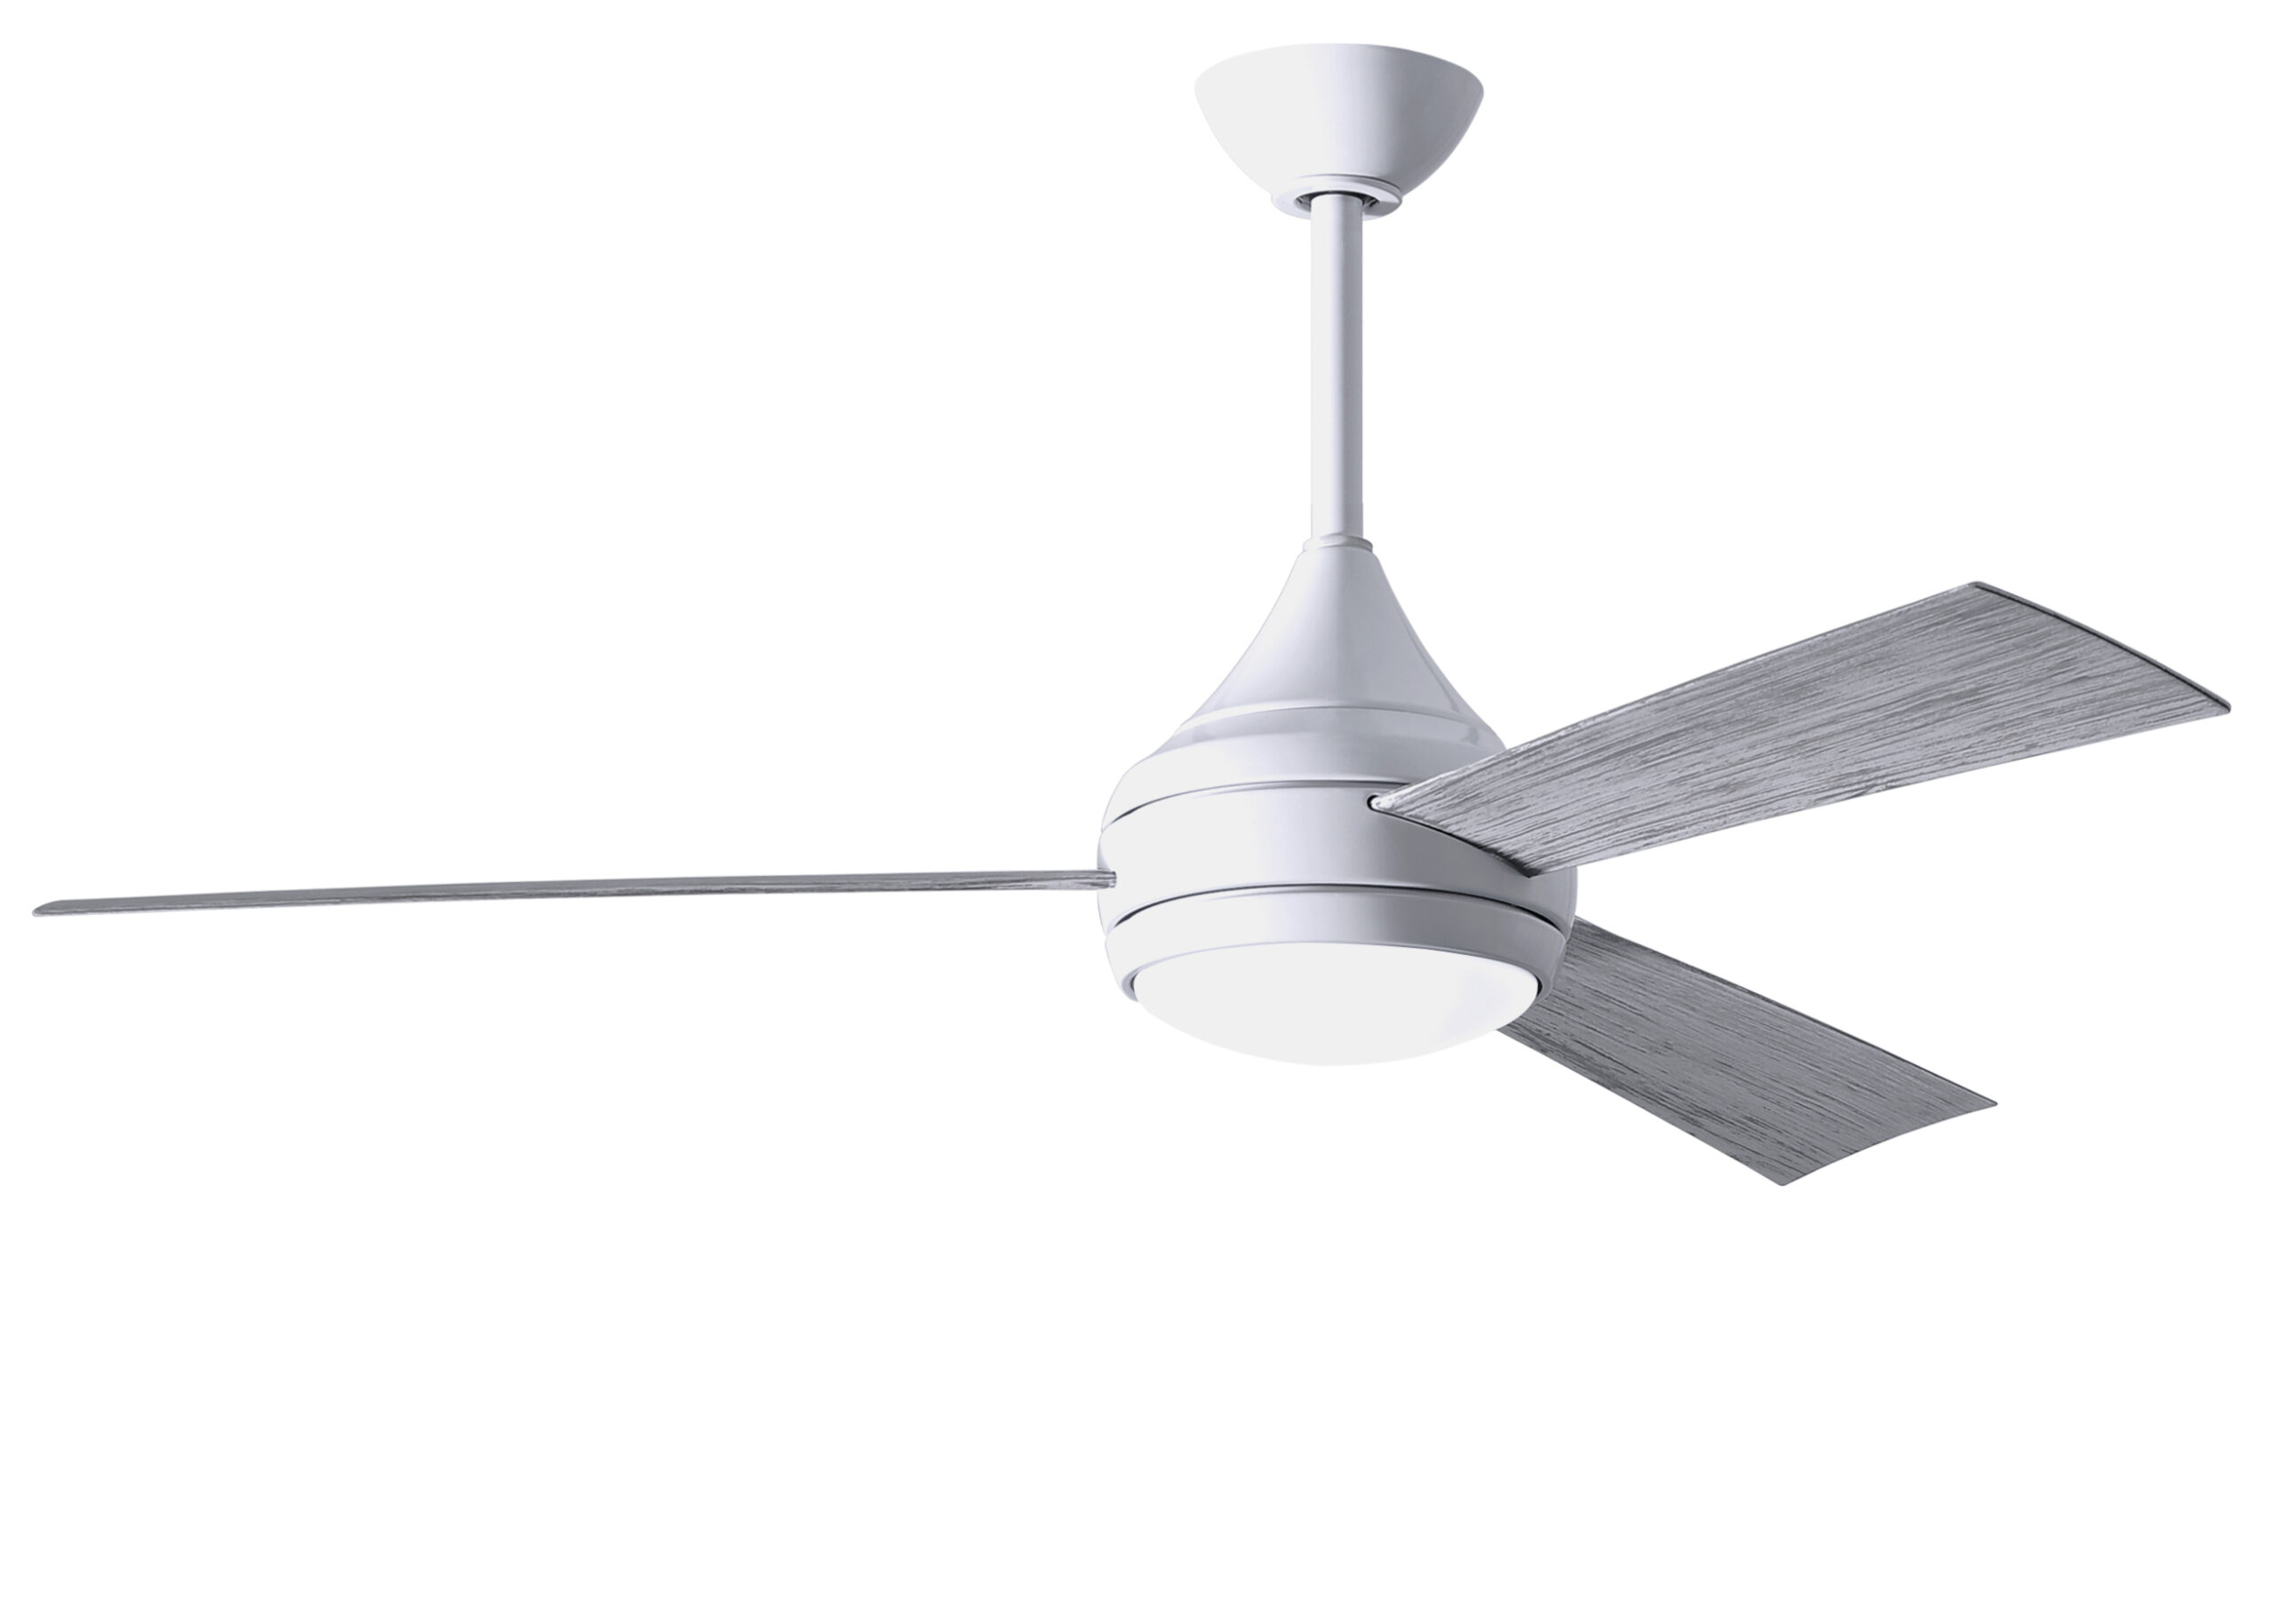 Donaire Ceiling Fan in Gloss White with Barn Wood Blades